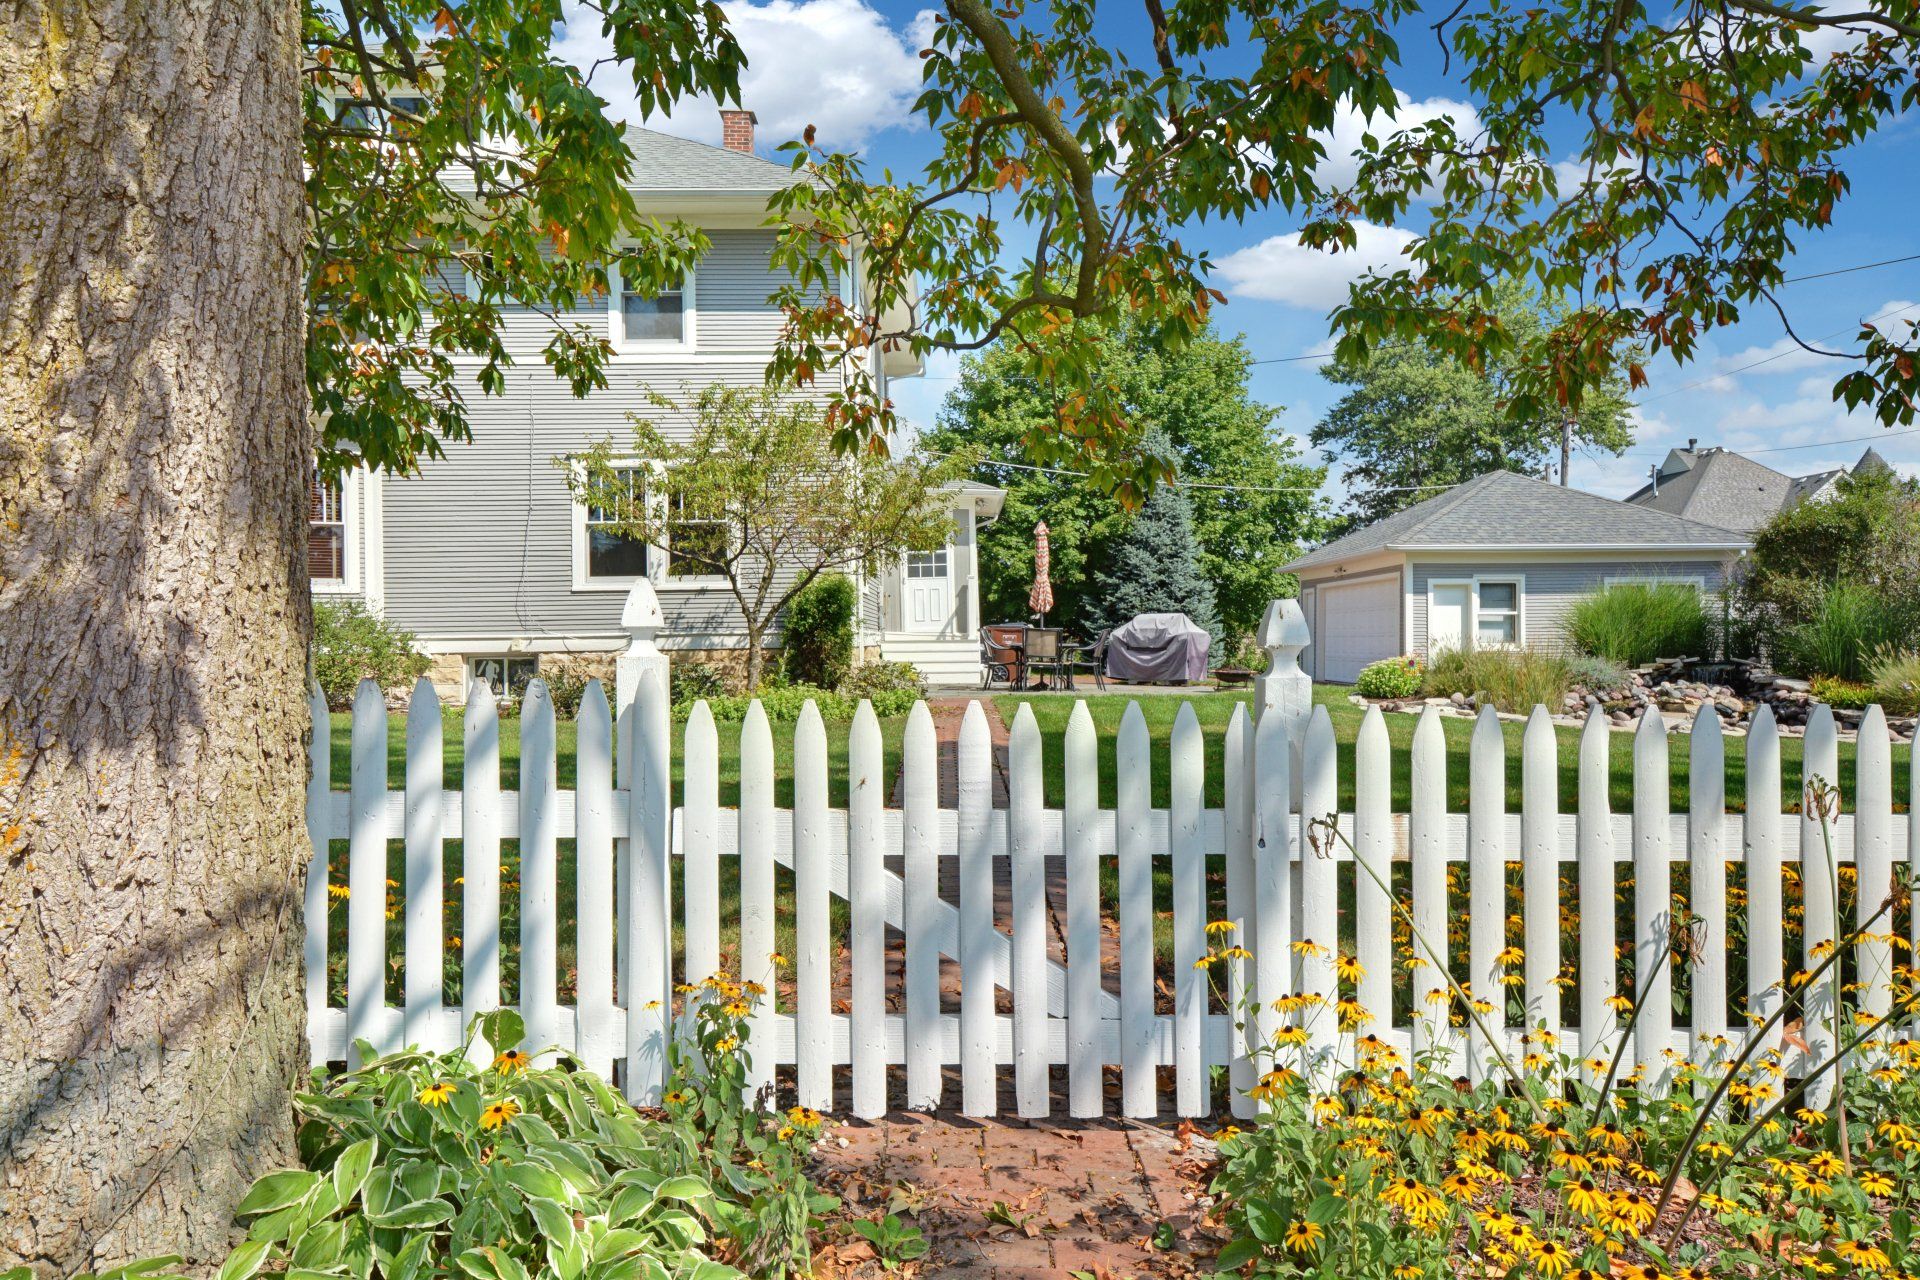 a white picket fence surrounds a garden in front of a house .